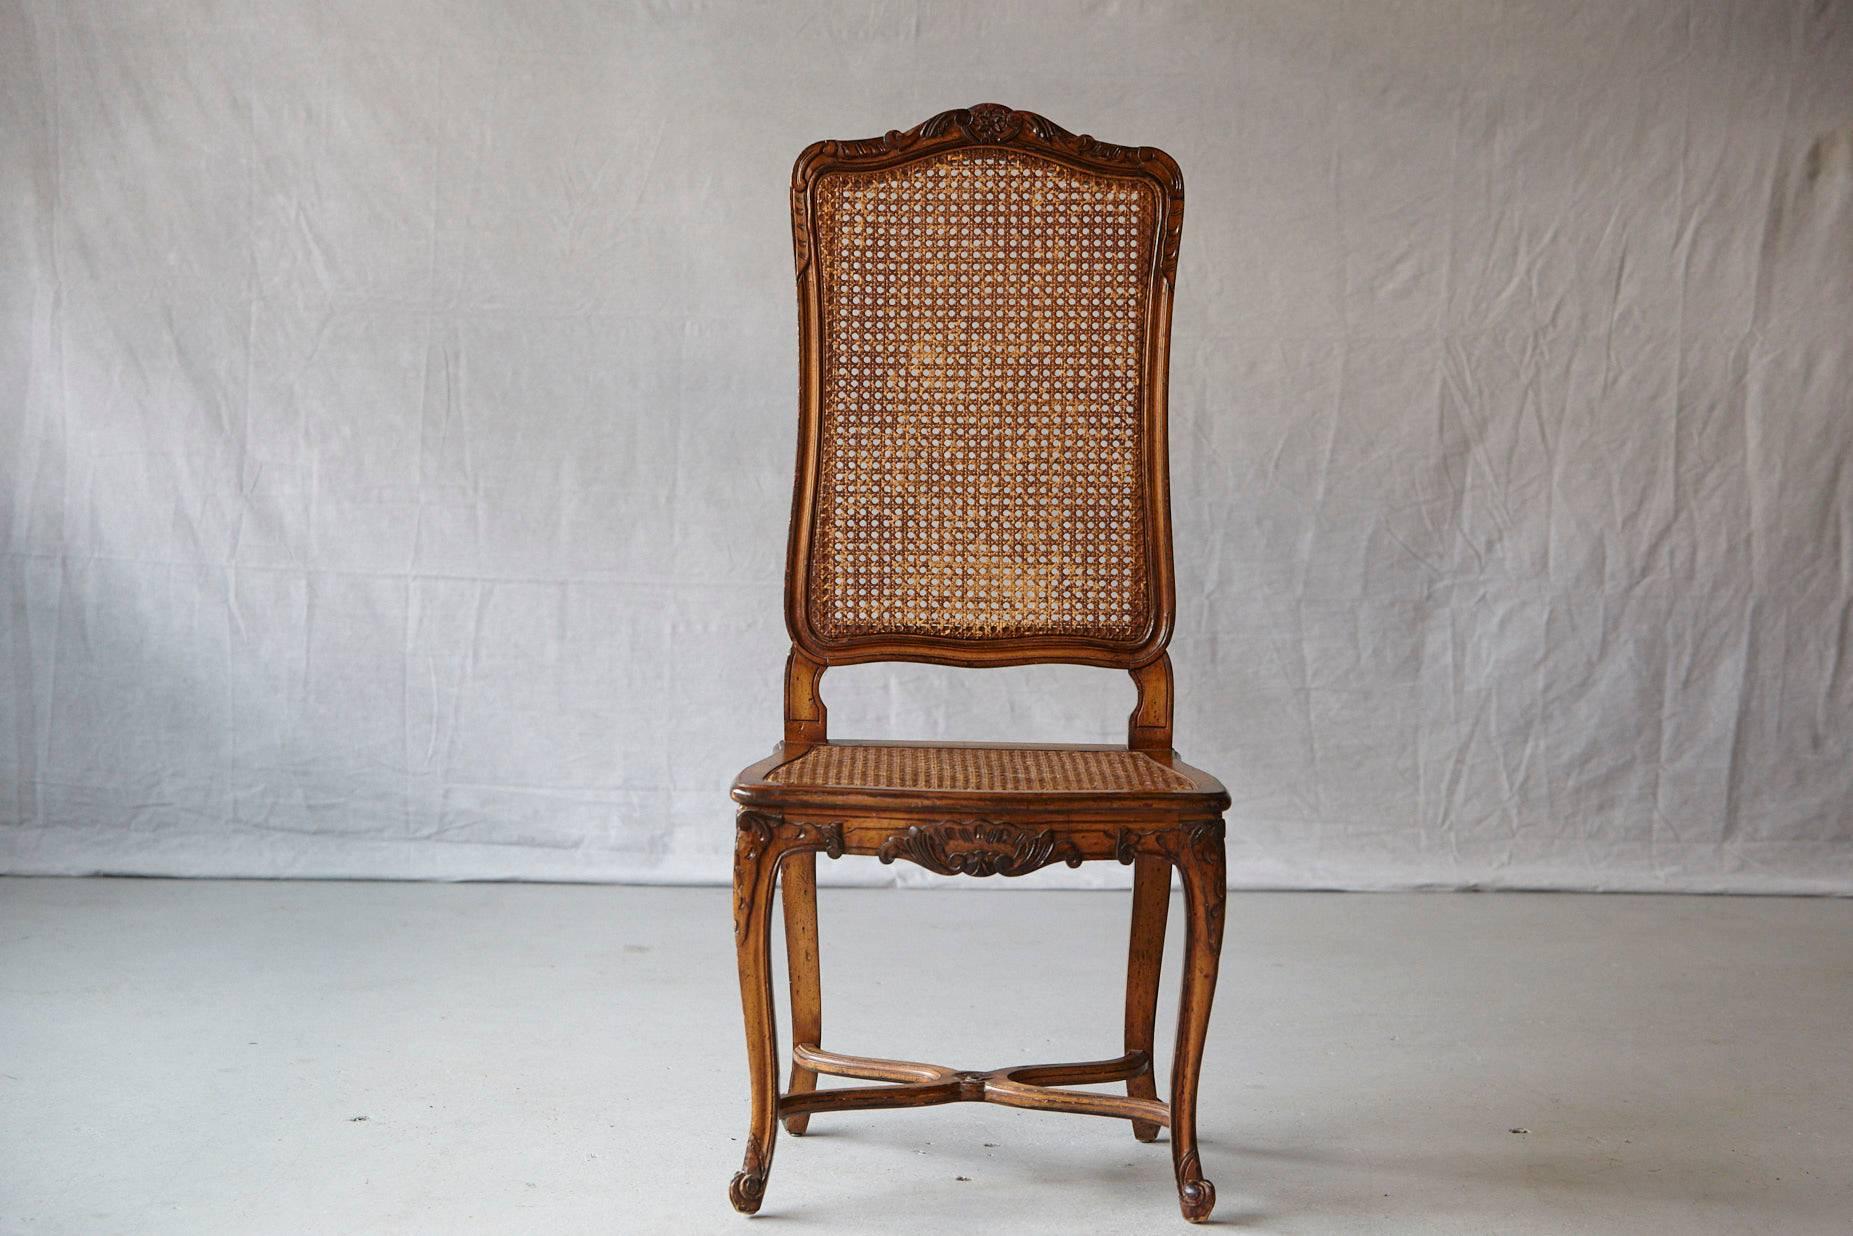 Lovely 19th century walnut high back chaise with caned back and seat. Carved knee mounts and blossom cresting, raised on cabriole legs. Legs joint by intersecting stretcher.
The cane is in very good condition, some flaking to caning finish.